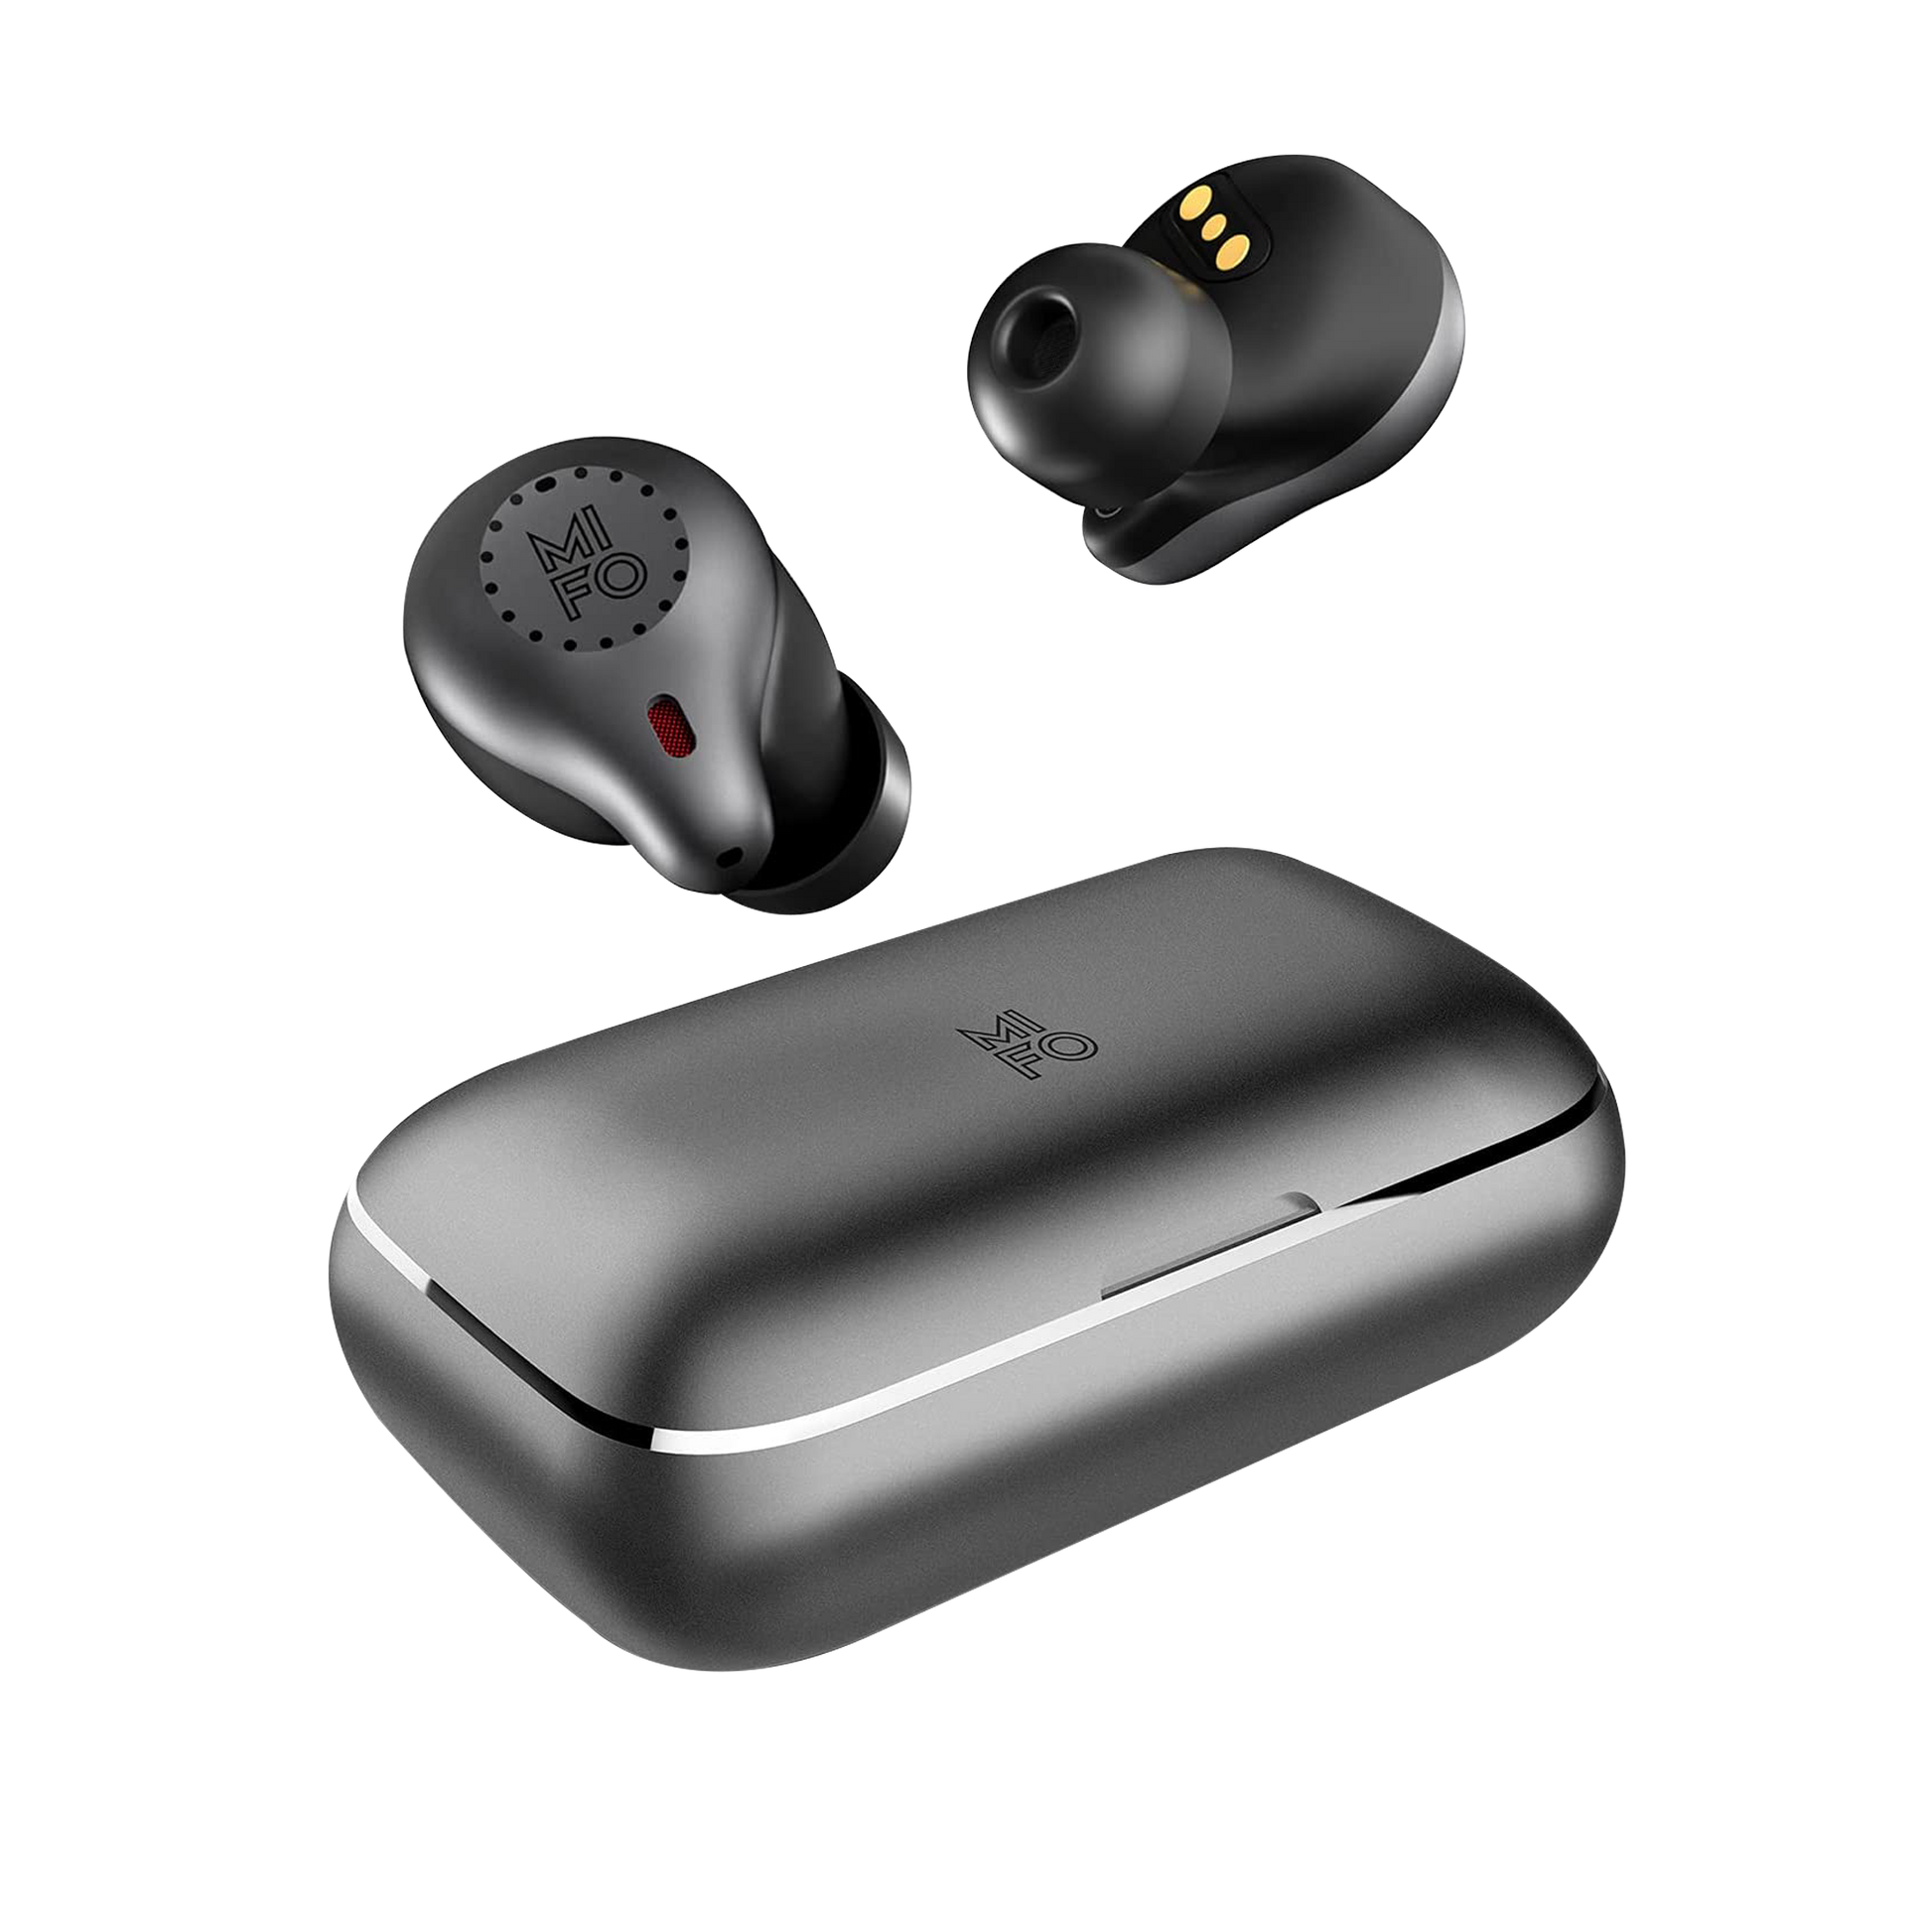 Best Wireless Earbuds - Mifo O5 Gen 2 Touch Earbuds with Case